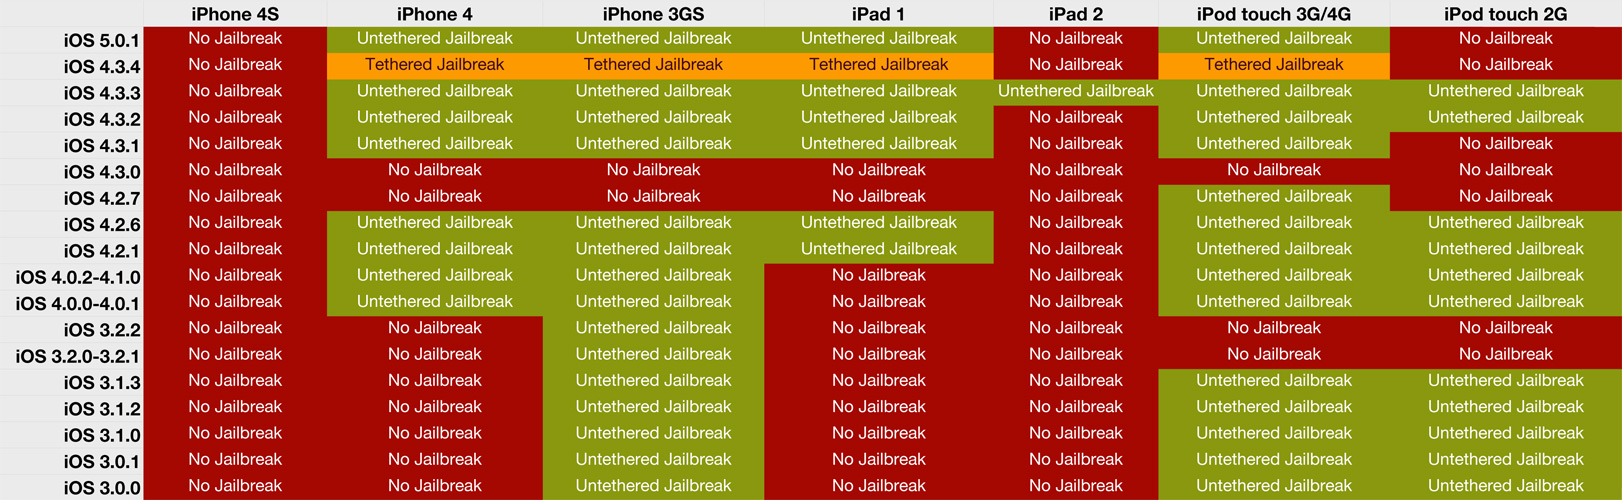 [iOS] This colorcoded chart explains if your iPhone/iPod/iPad can be